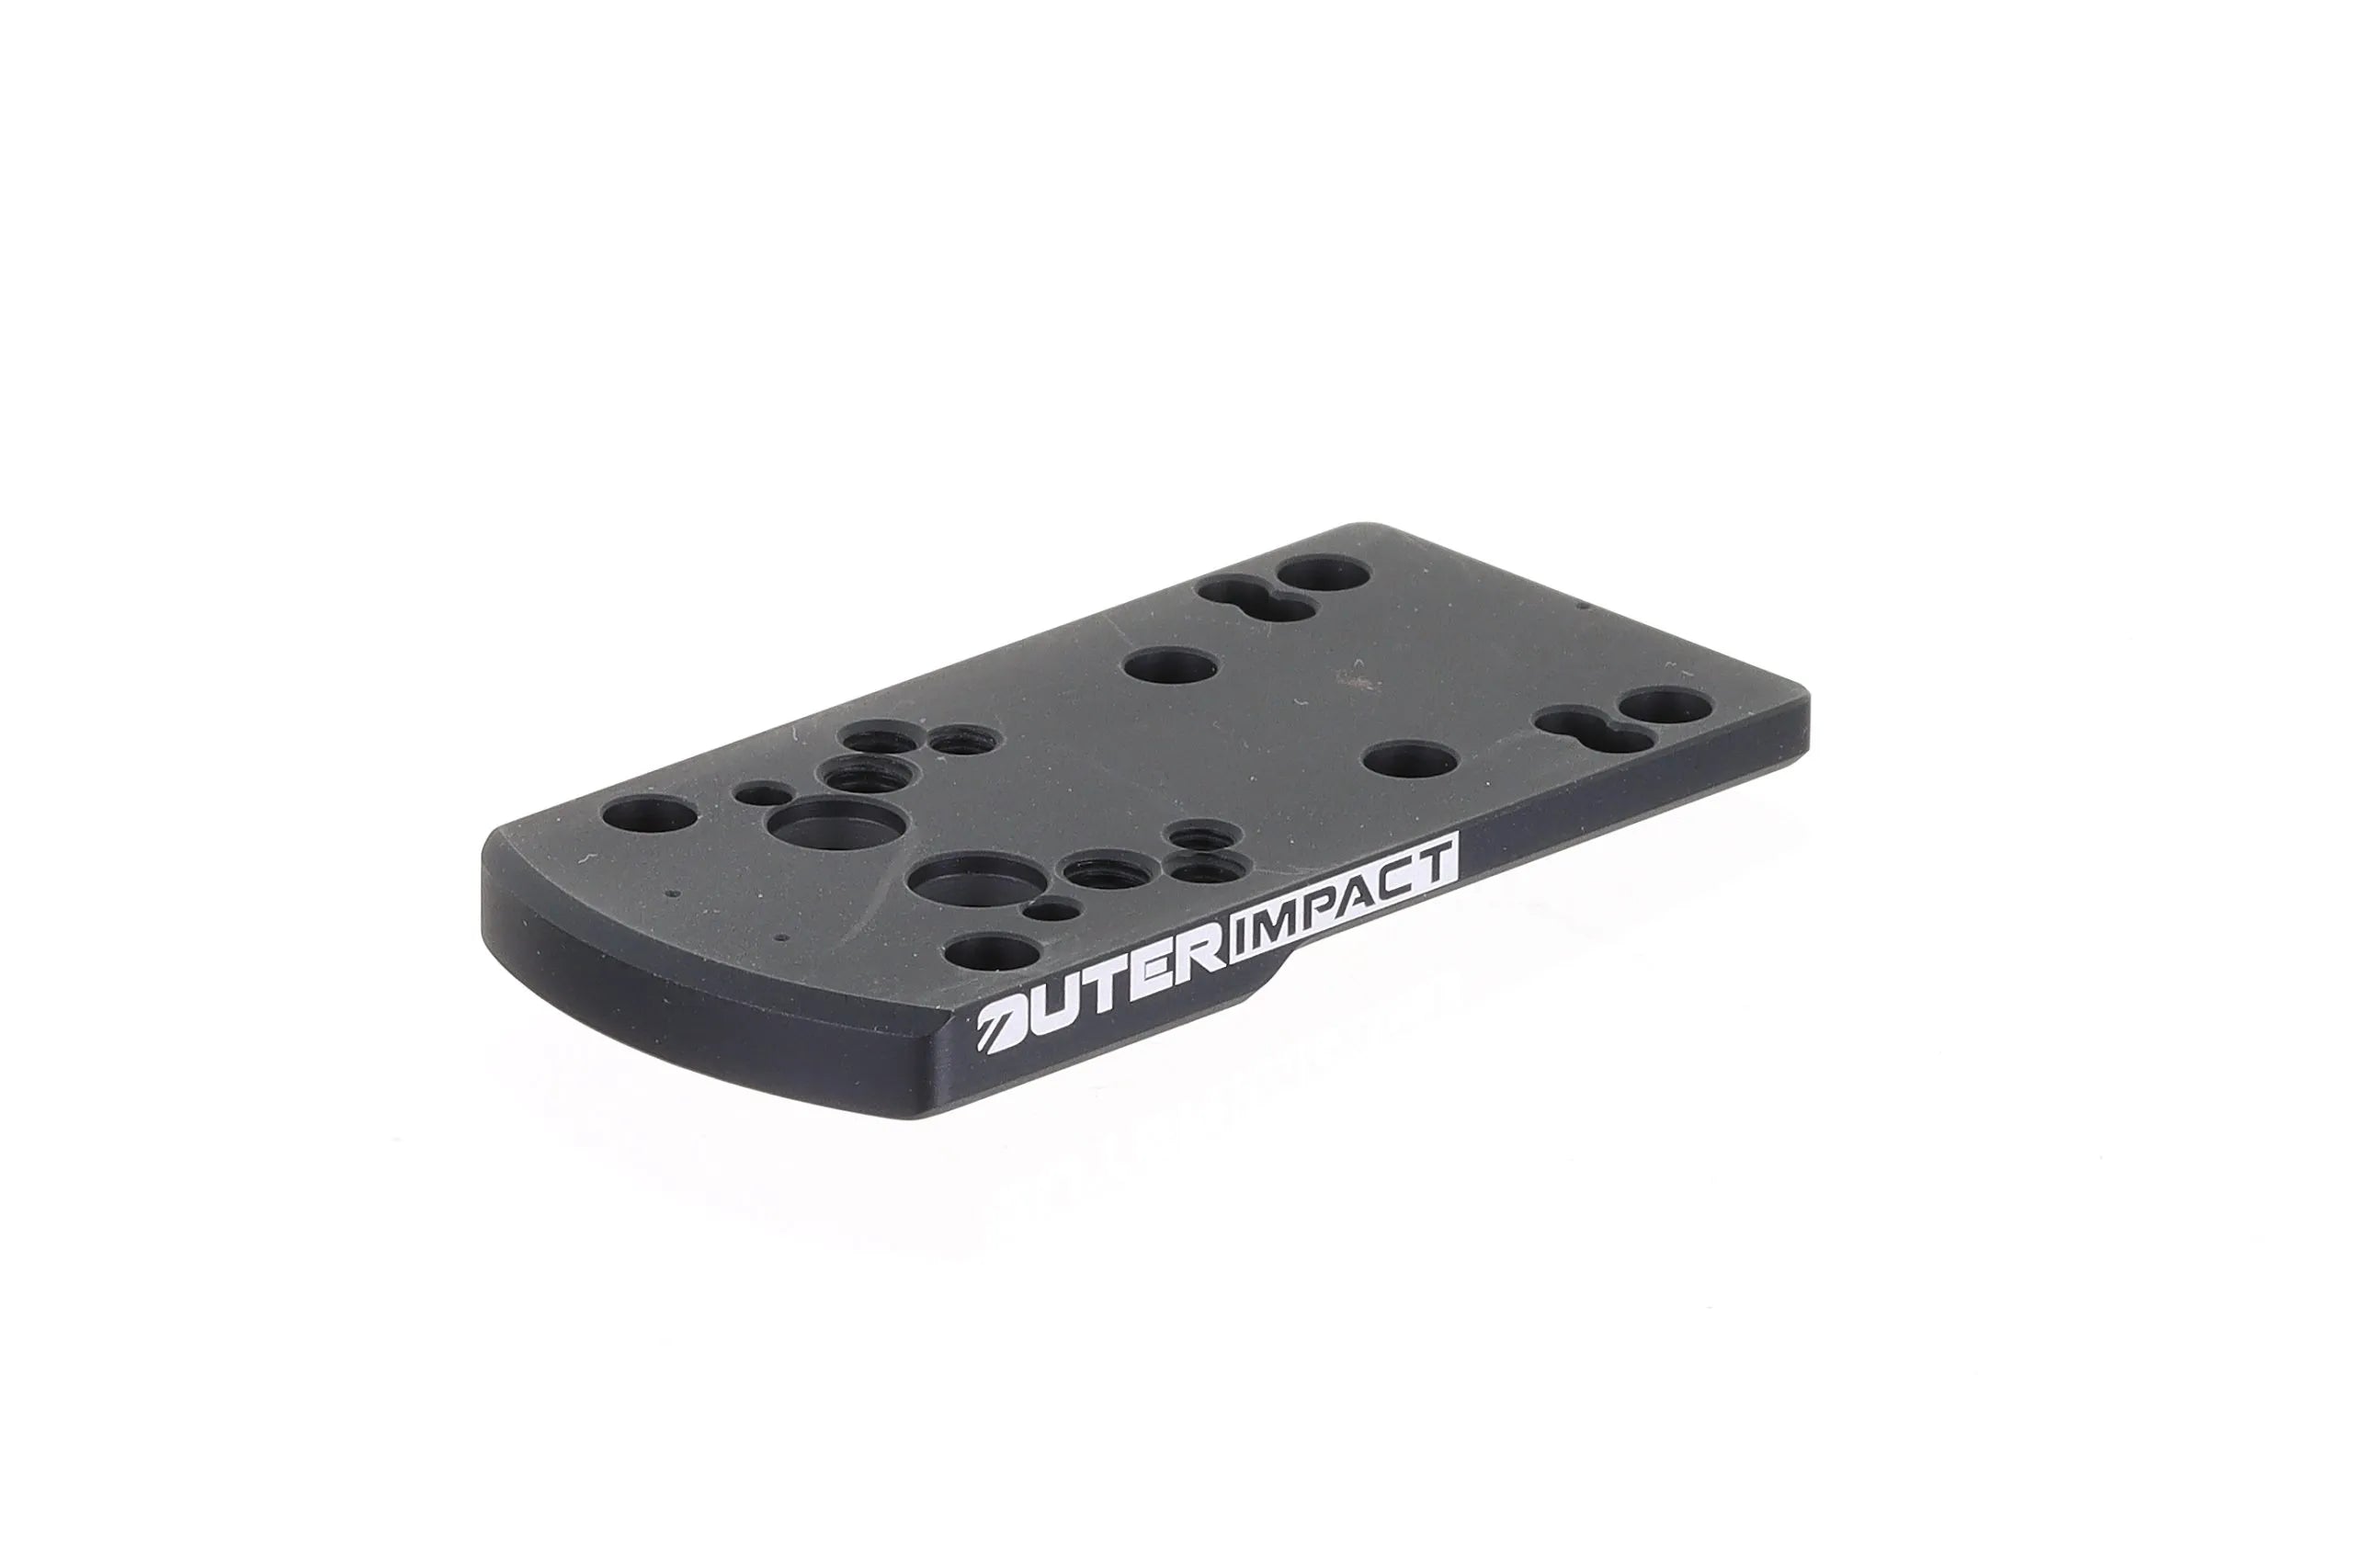 Smith & Wesson M&P Pistol Red Dot Adapter Mount Plate - OuterImpact